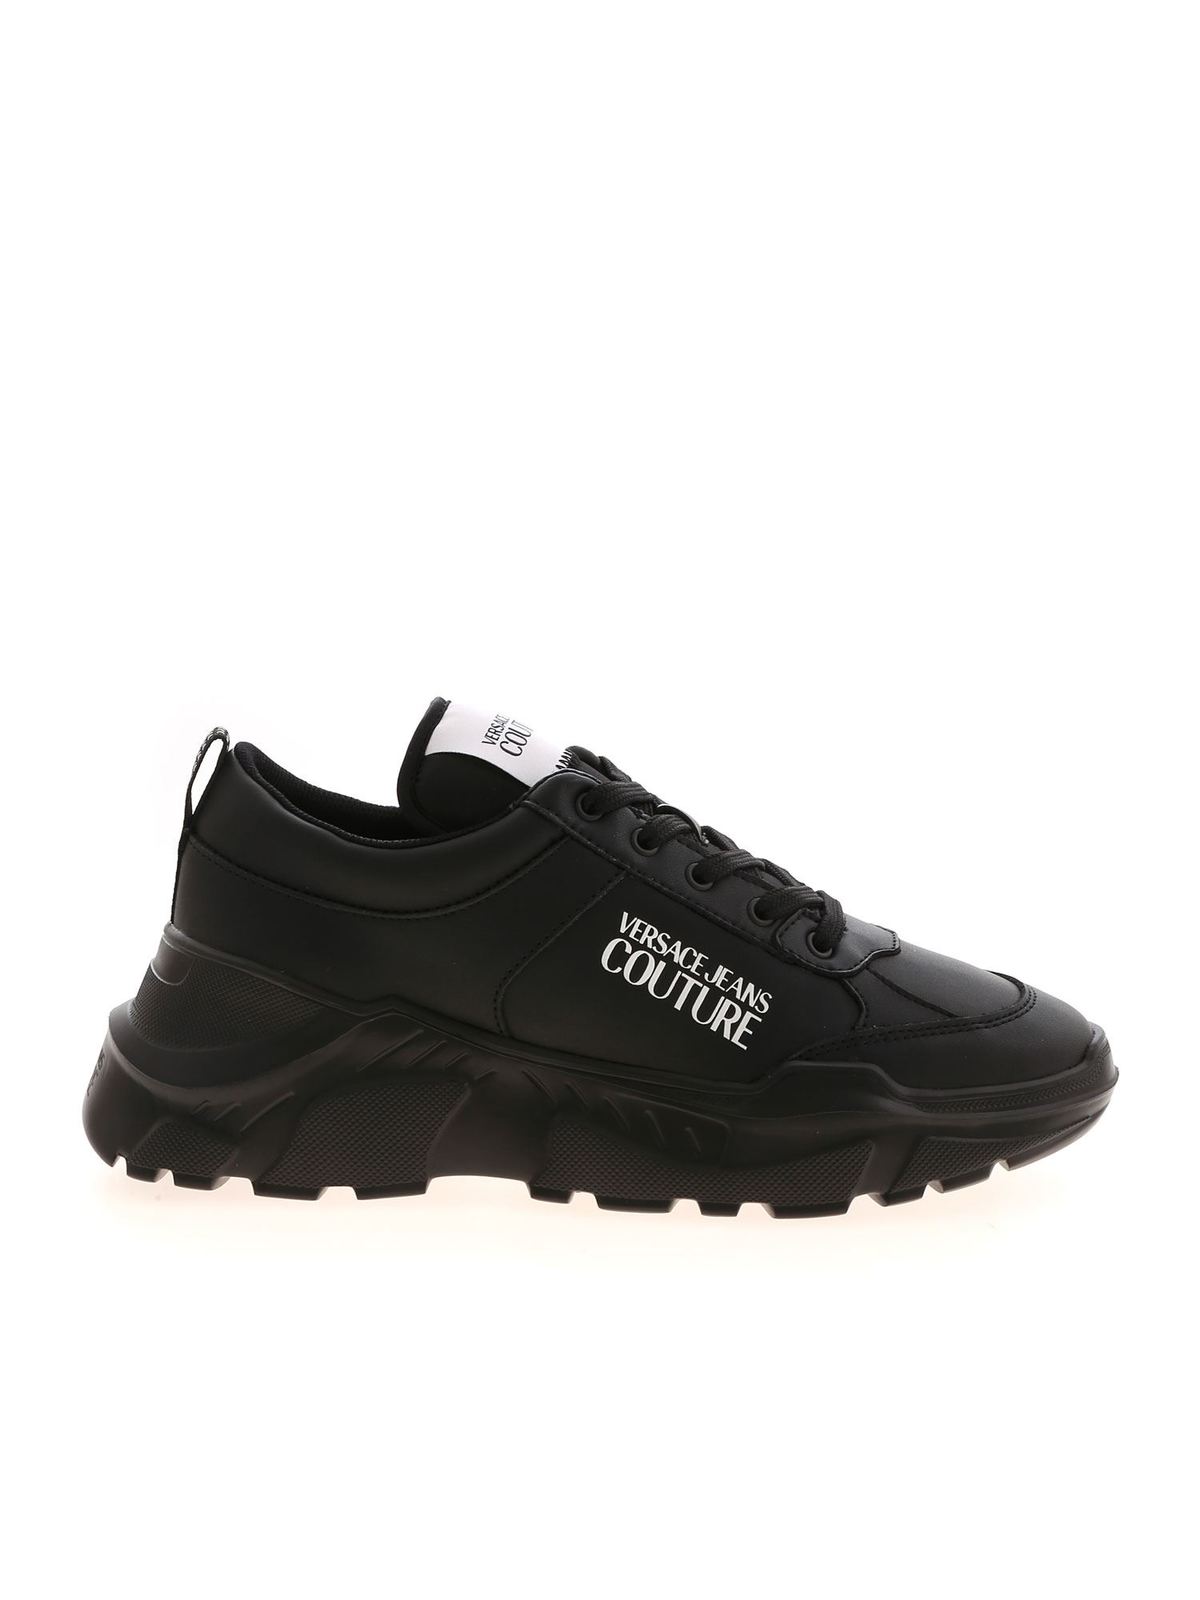 versace jeans black trainers